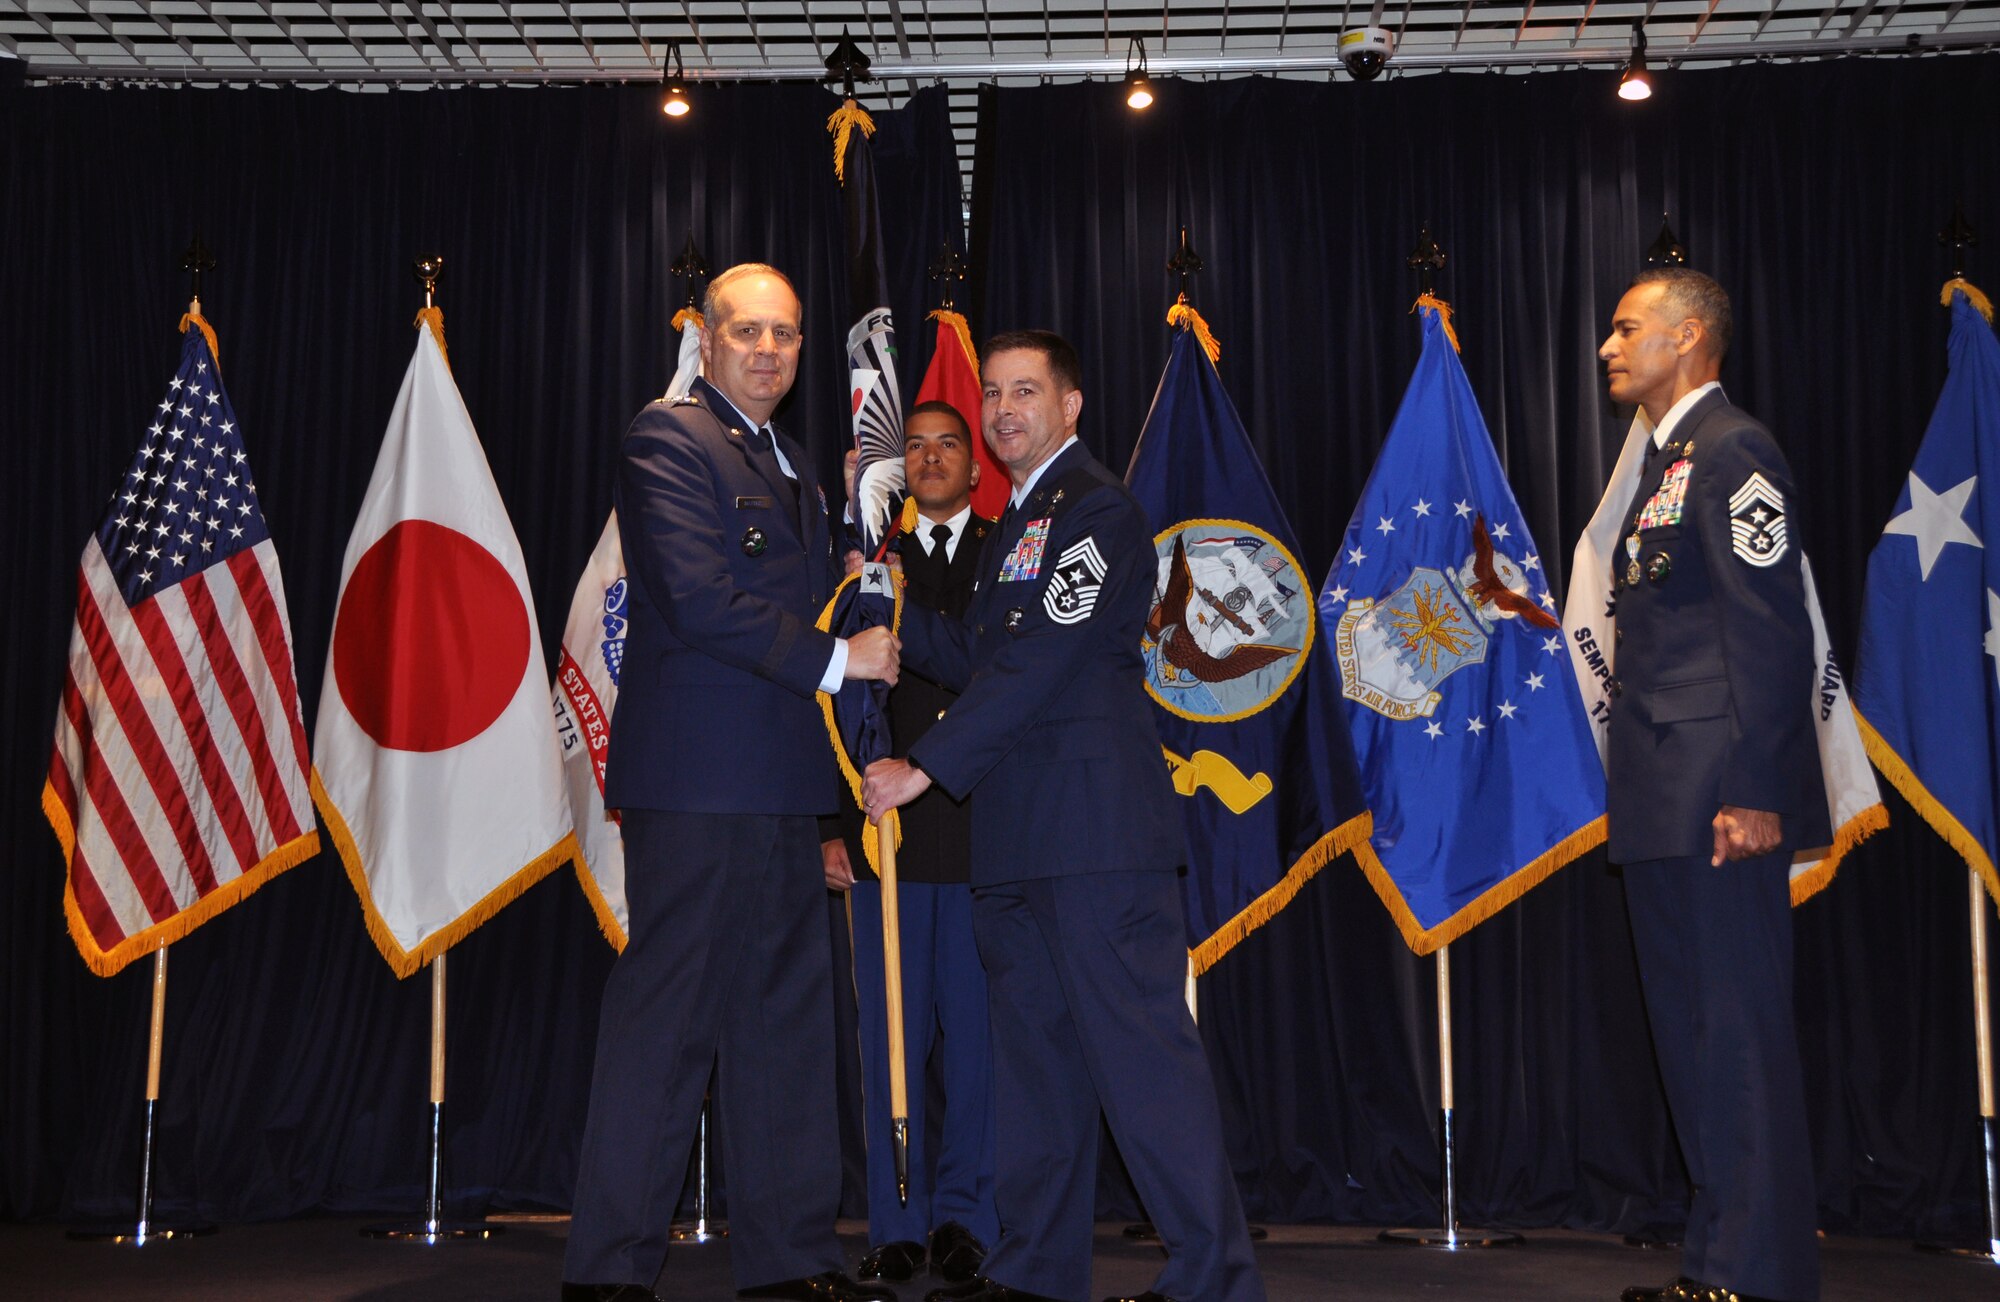 Chief Master Sgt. Terrence Greene (right), who served dual-hatted as the U.S. Forces Japan Senior Enlisted Leader and 5th Air Force Command Chief, relinquished his responsibilities to Chief Master Sgt. Richard. Winegardner Jr., who will serve as the USFJ SEL. USFJ and 5th AF commander Lt. Gen. Jerry Martinez (left) presided over the Change of Responsibility ceremony. This is the first time a senior enlisted leader will serve in each position.